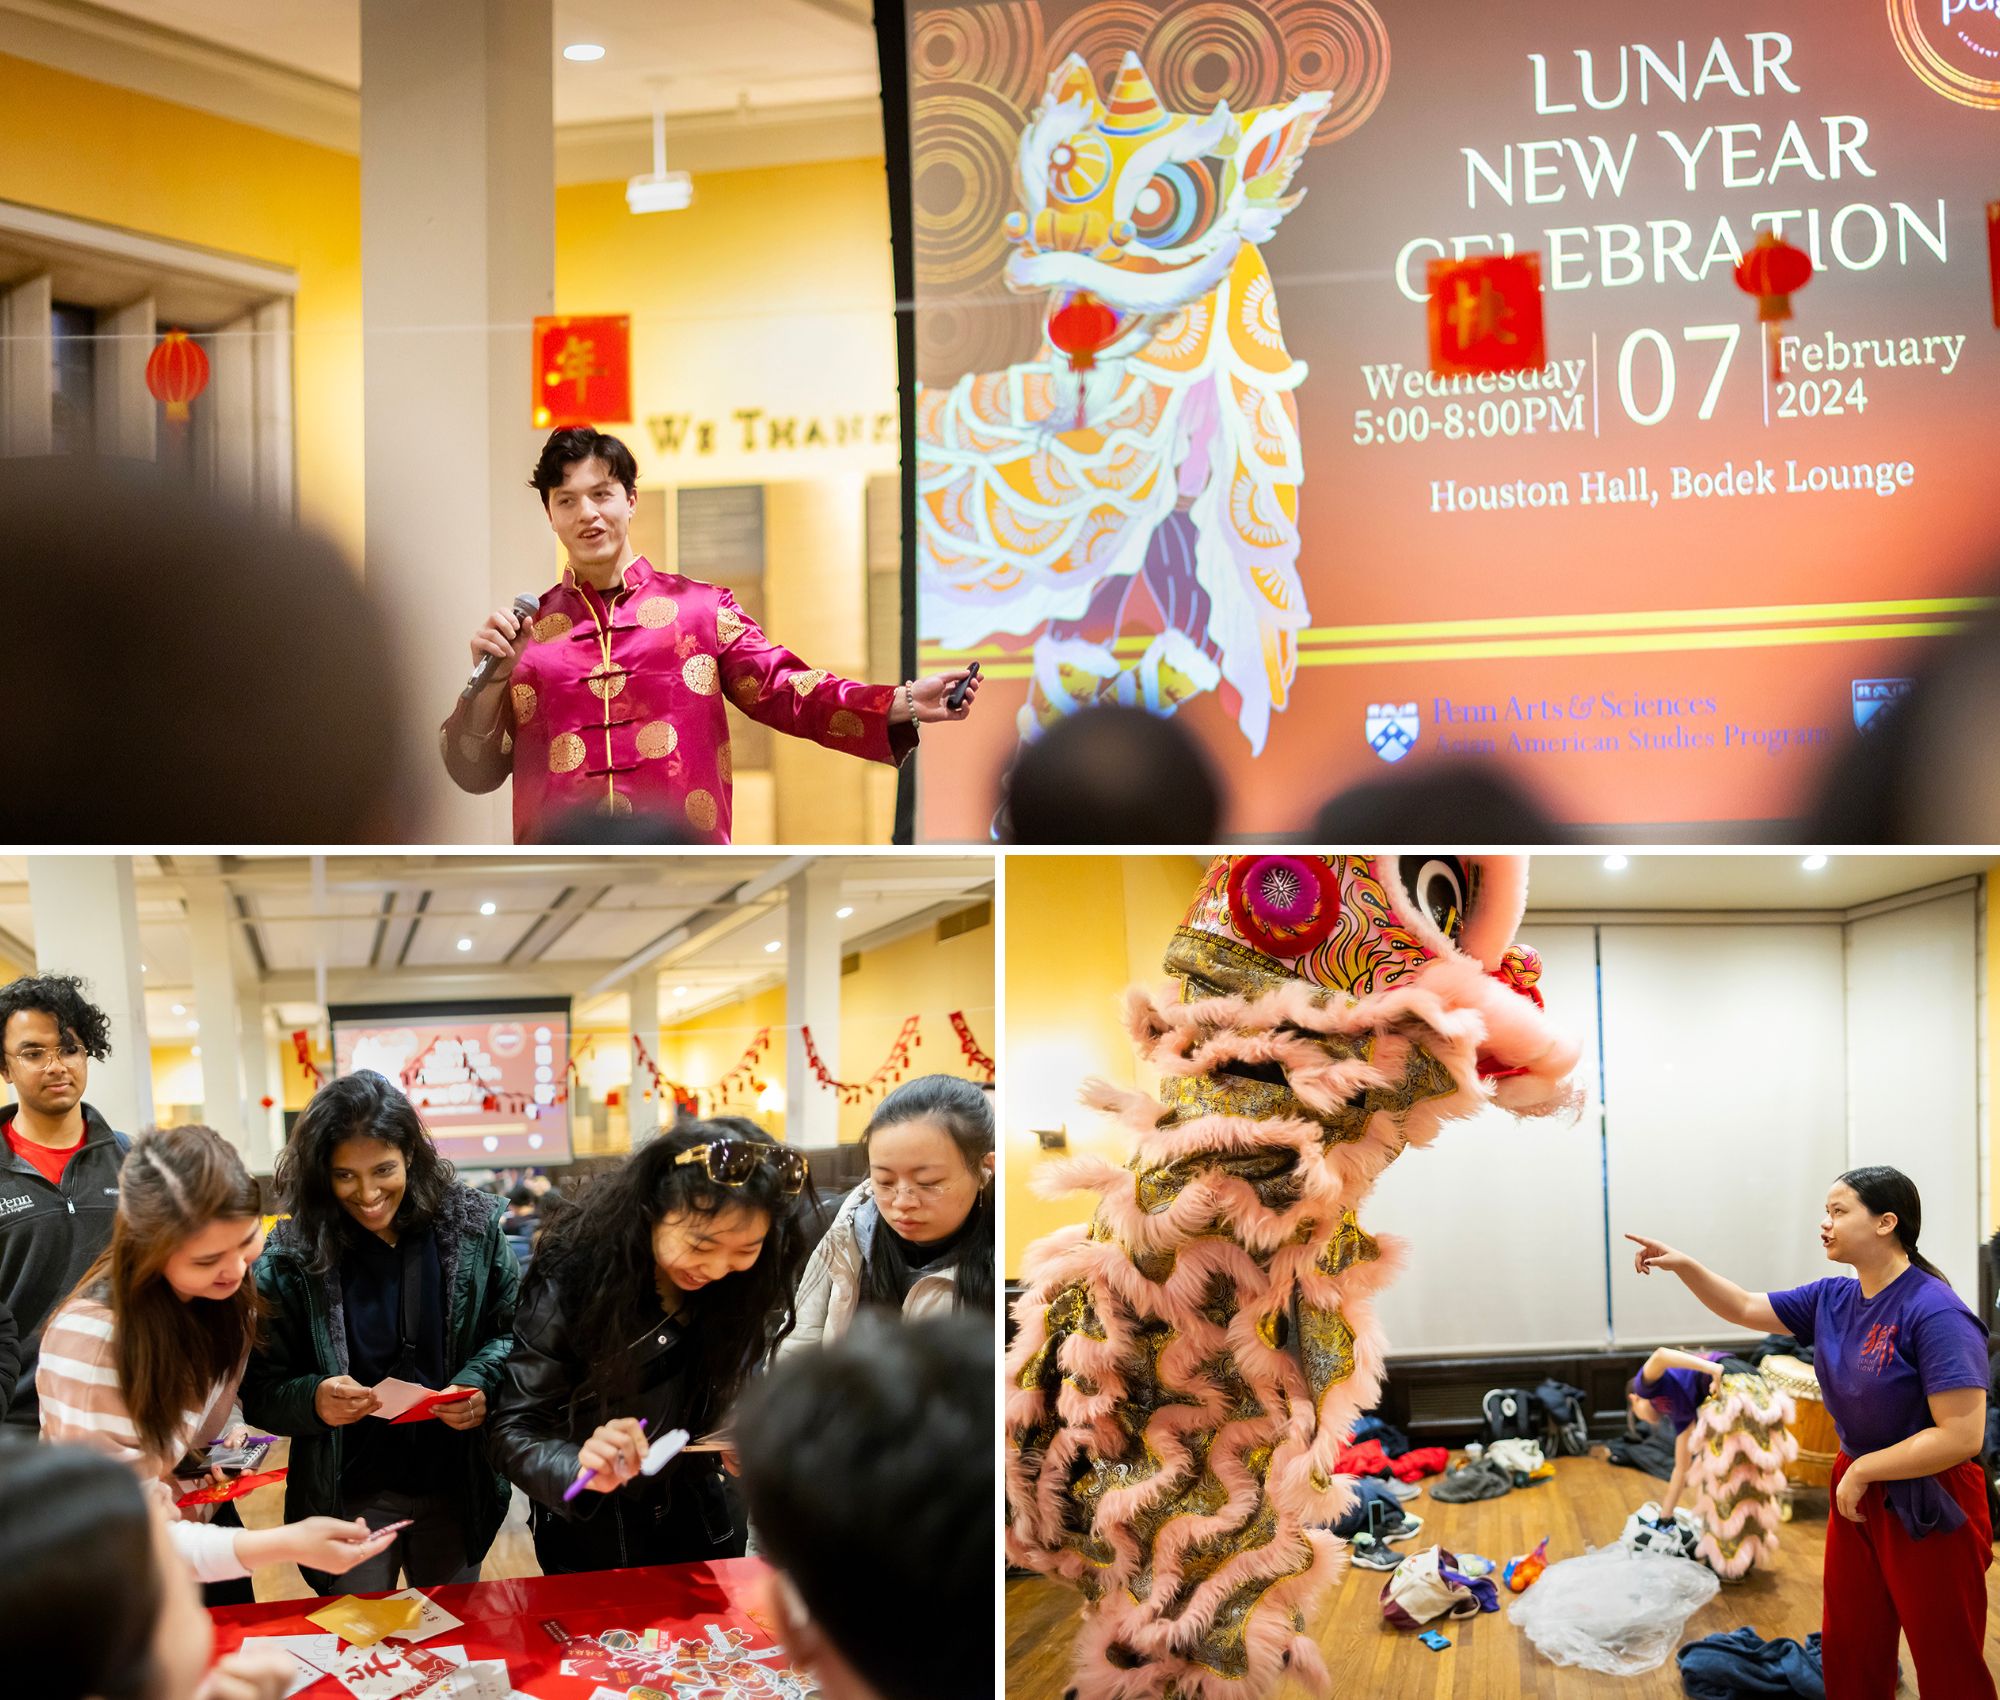 Top image: A person addressing the crowd at the celebration, bottom left: People gathered at a table getting freebies, bottom right: A celebrant and the dragon puppet.